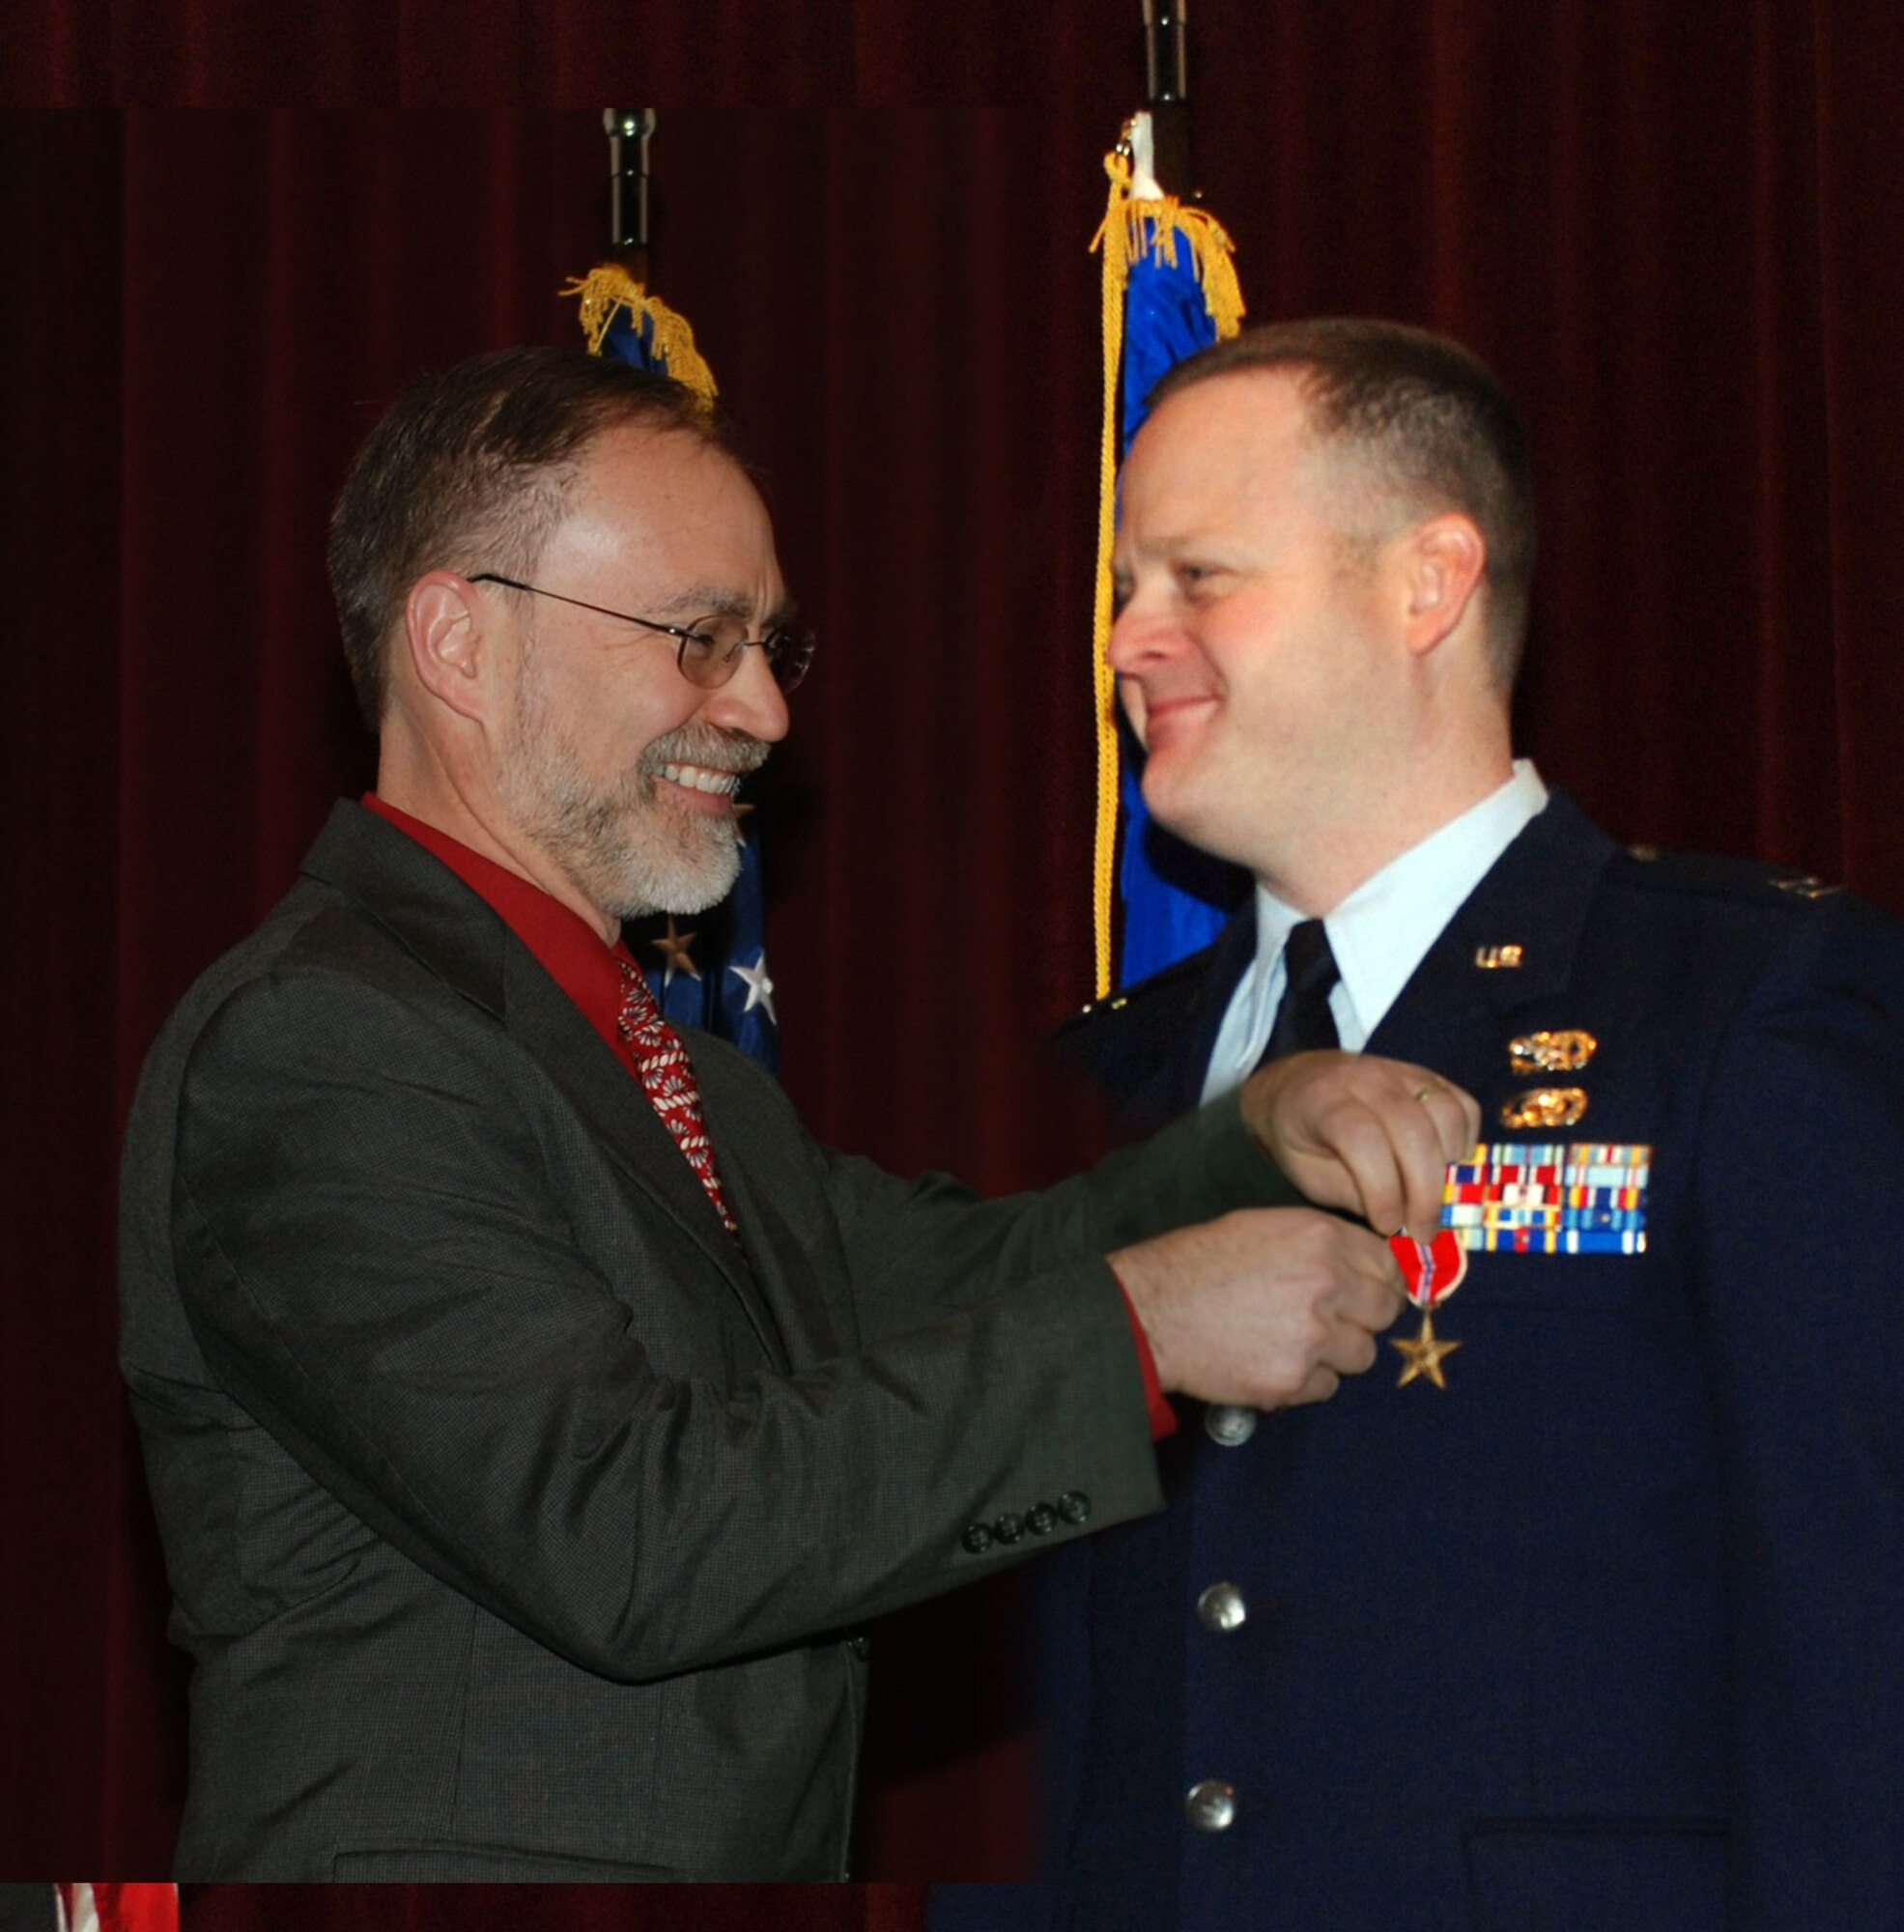 Mr. Thomas Wells, Director, 711th Human Performance Wing, presents the Bronze Star Medal to Capt. Derek Williamson during a Director’s Call meeting at Wright-Patterson Air Force Base, Ohio. (Photo by Chris Gulliford, 711 HPW)